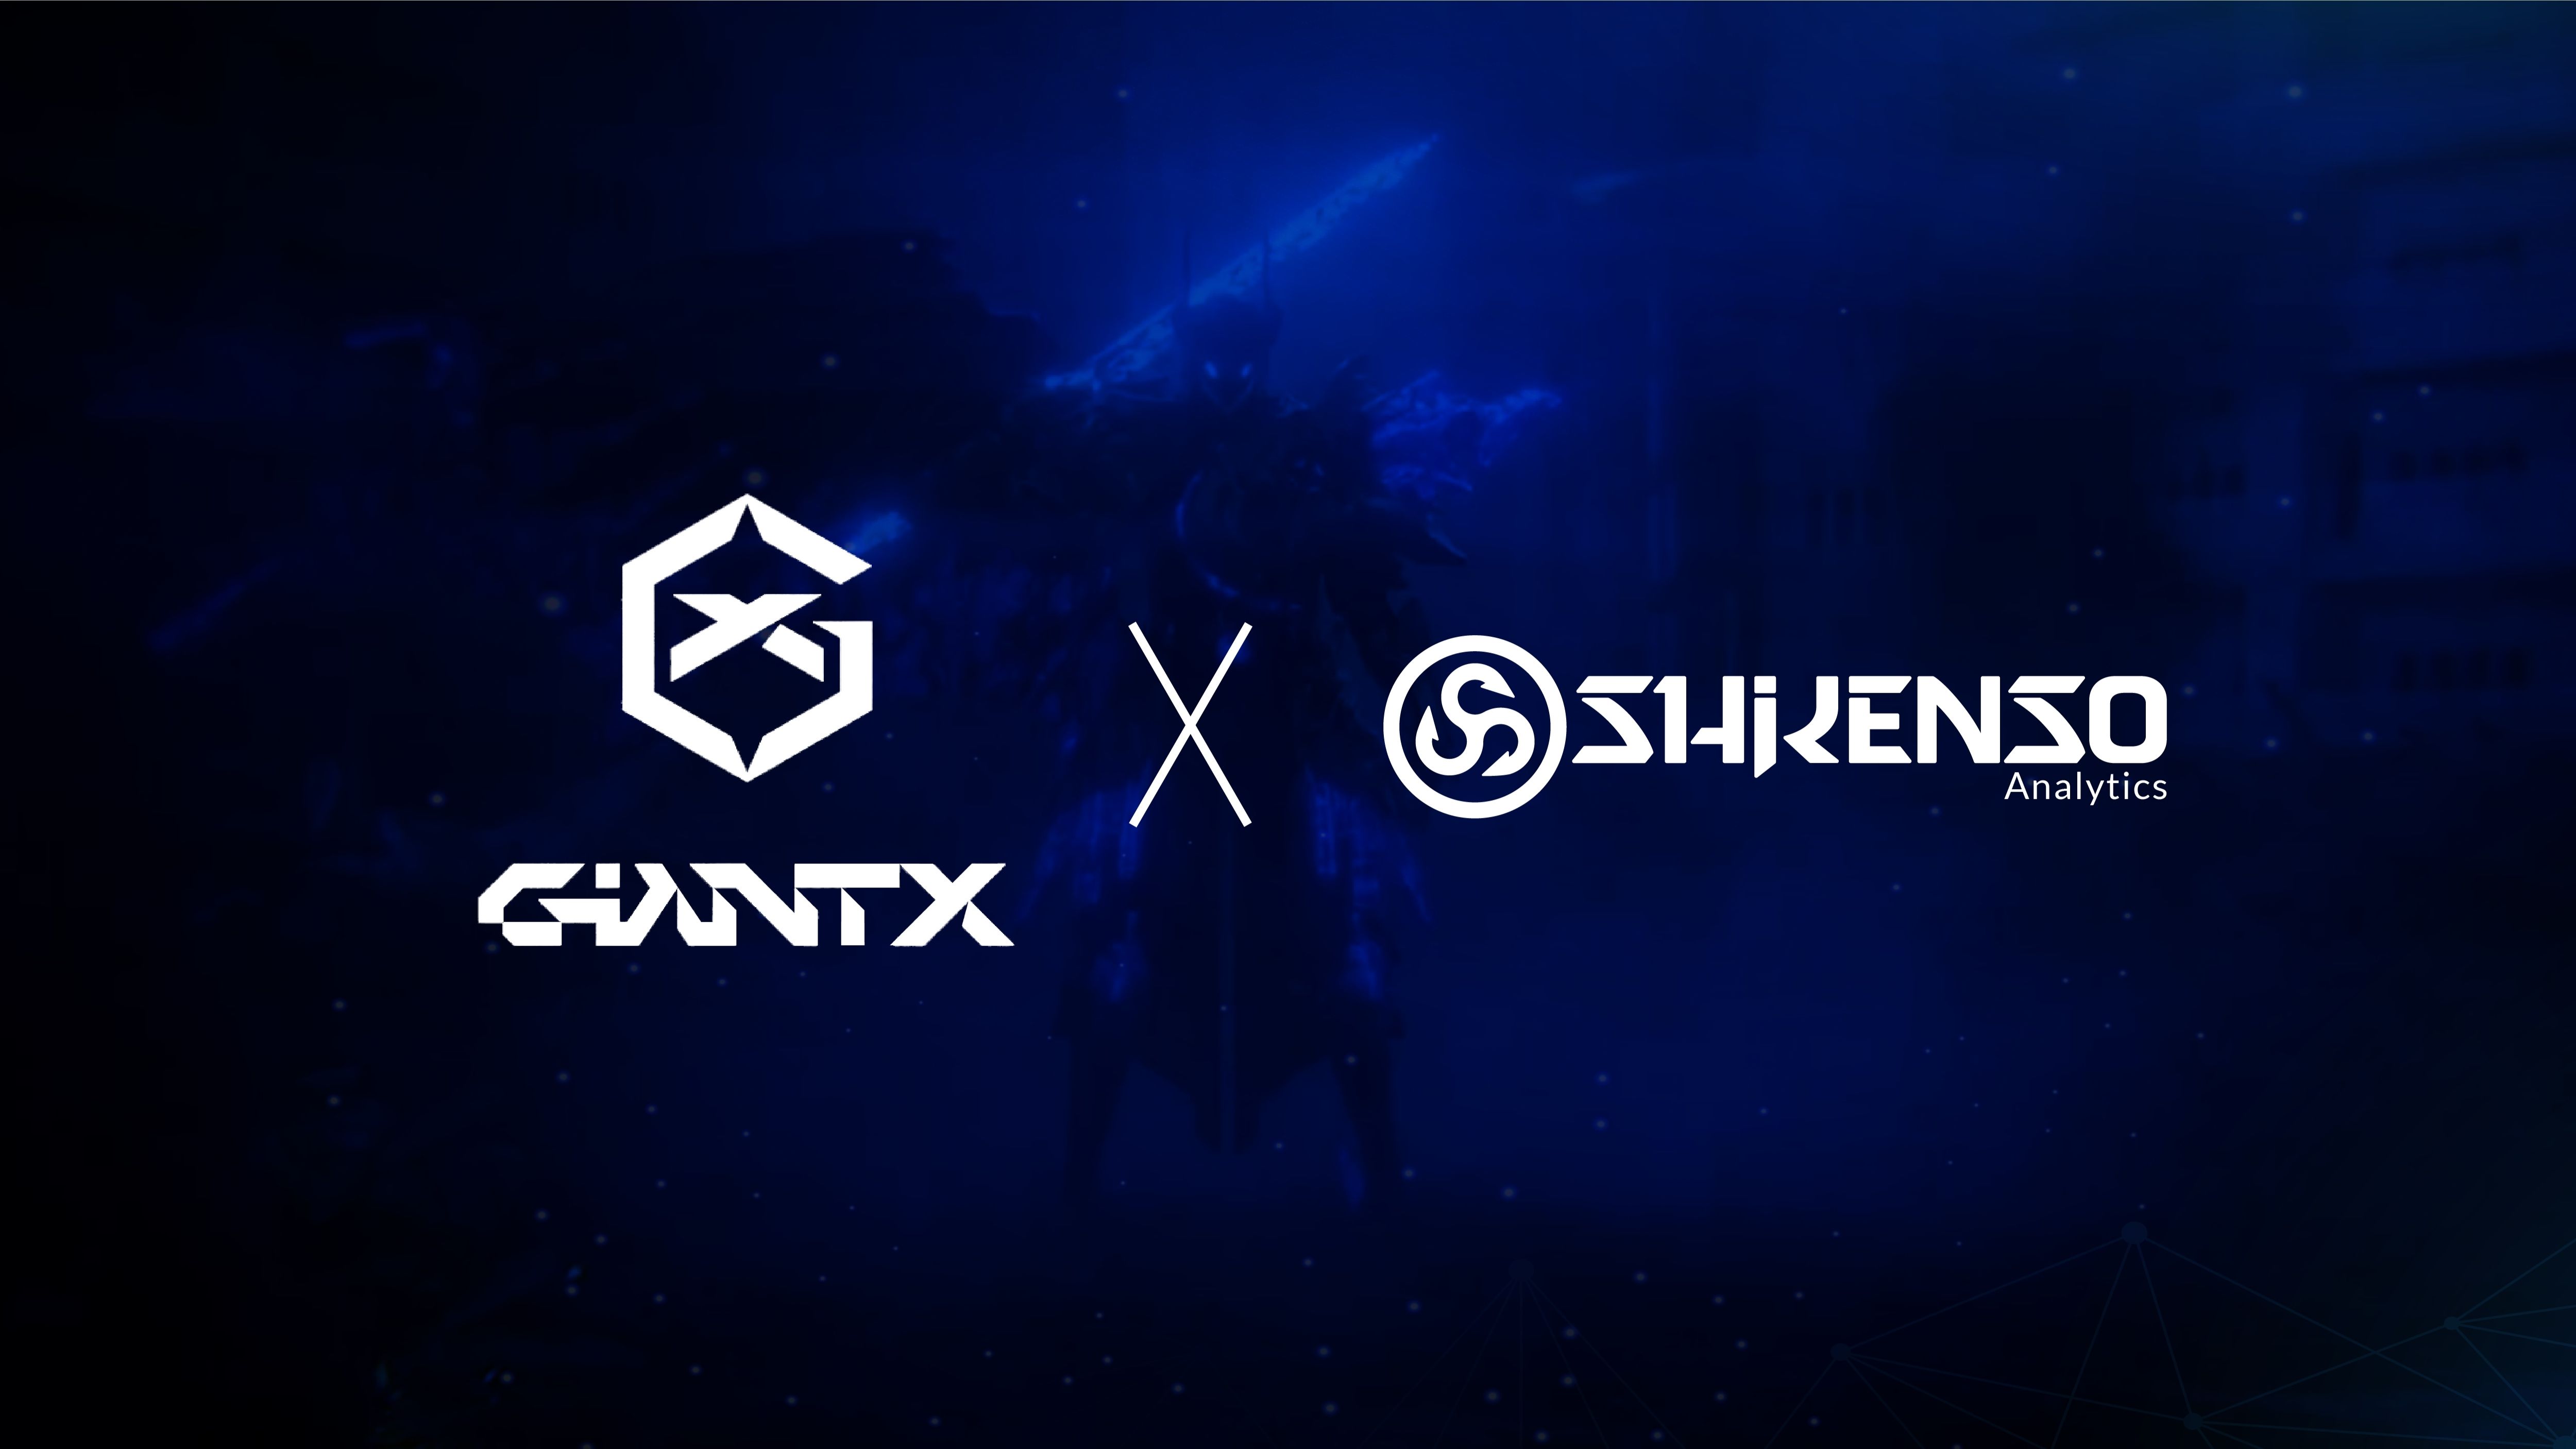 GIANTX expands its sponsorship data partnership with Shikenso Analytics after EXCEL ESPORTS relied on the data services for over two years.